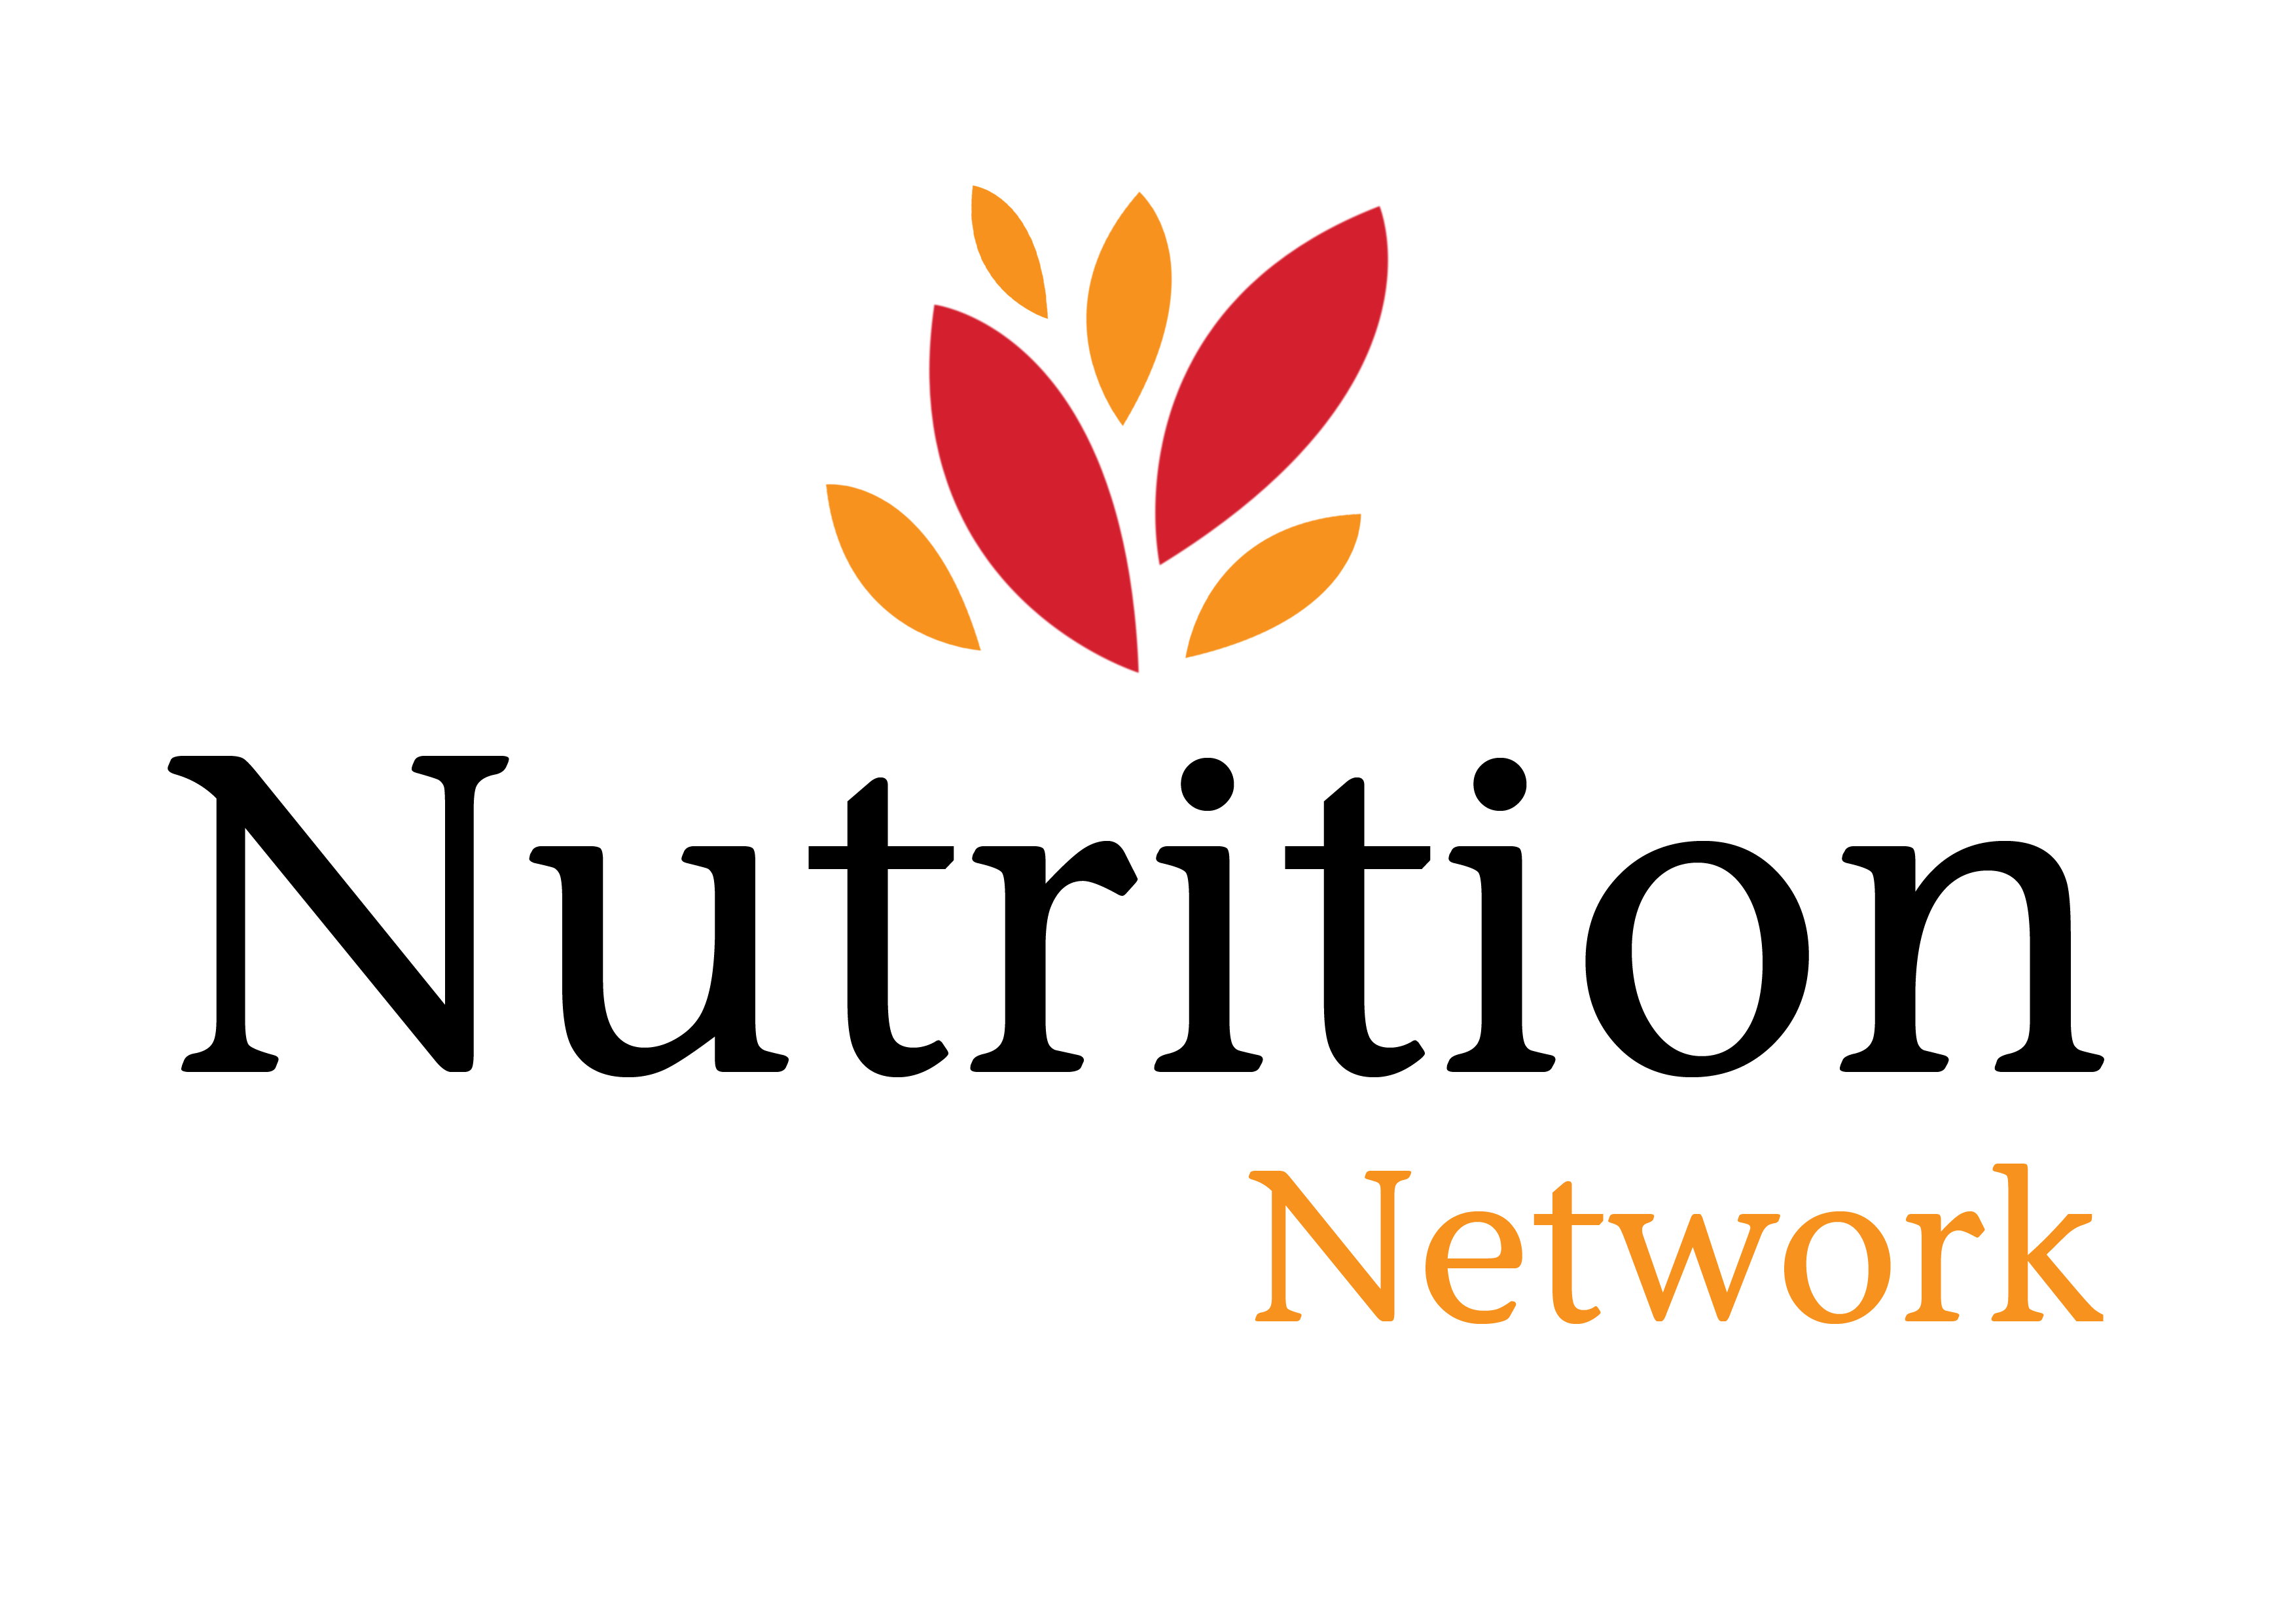 nutrition network, ketogenic diet, LCHF, diabetes, health, fat, low carb